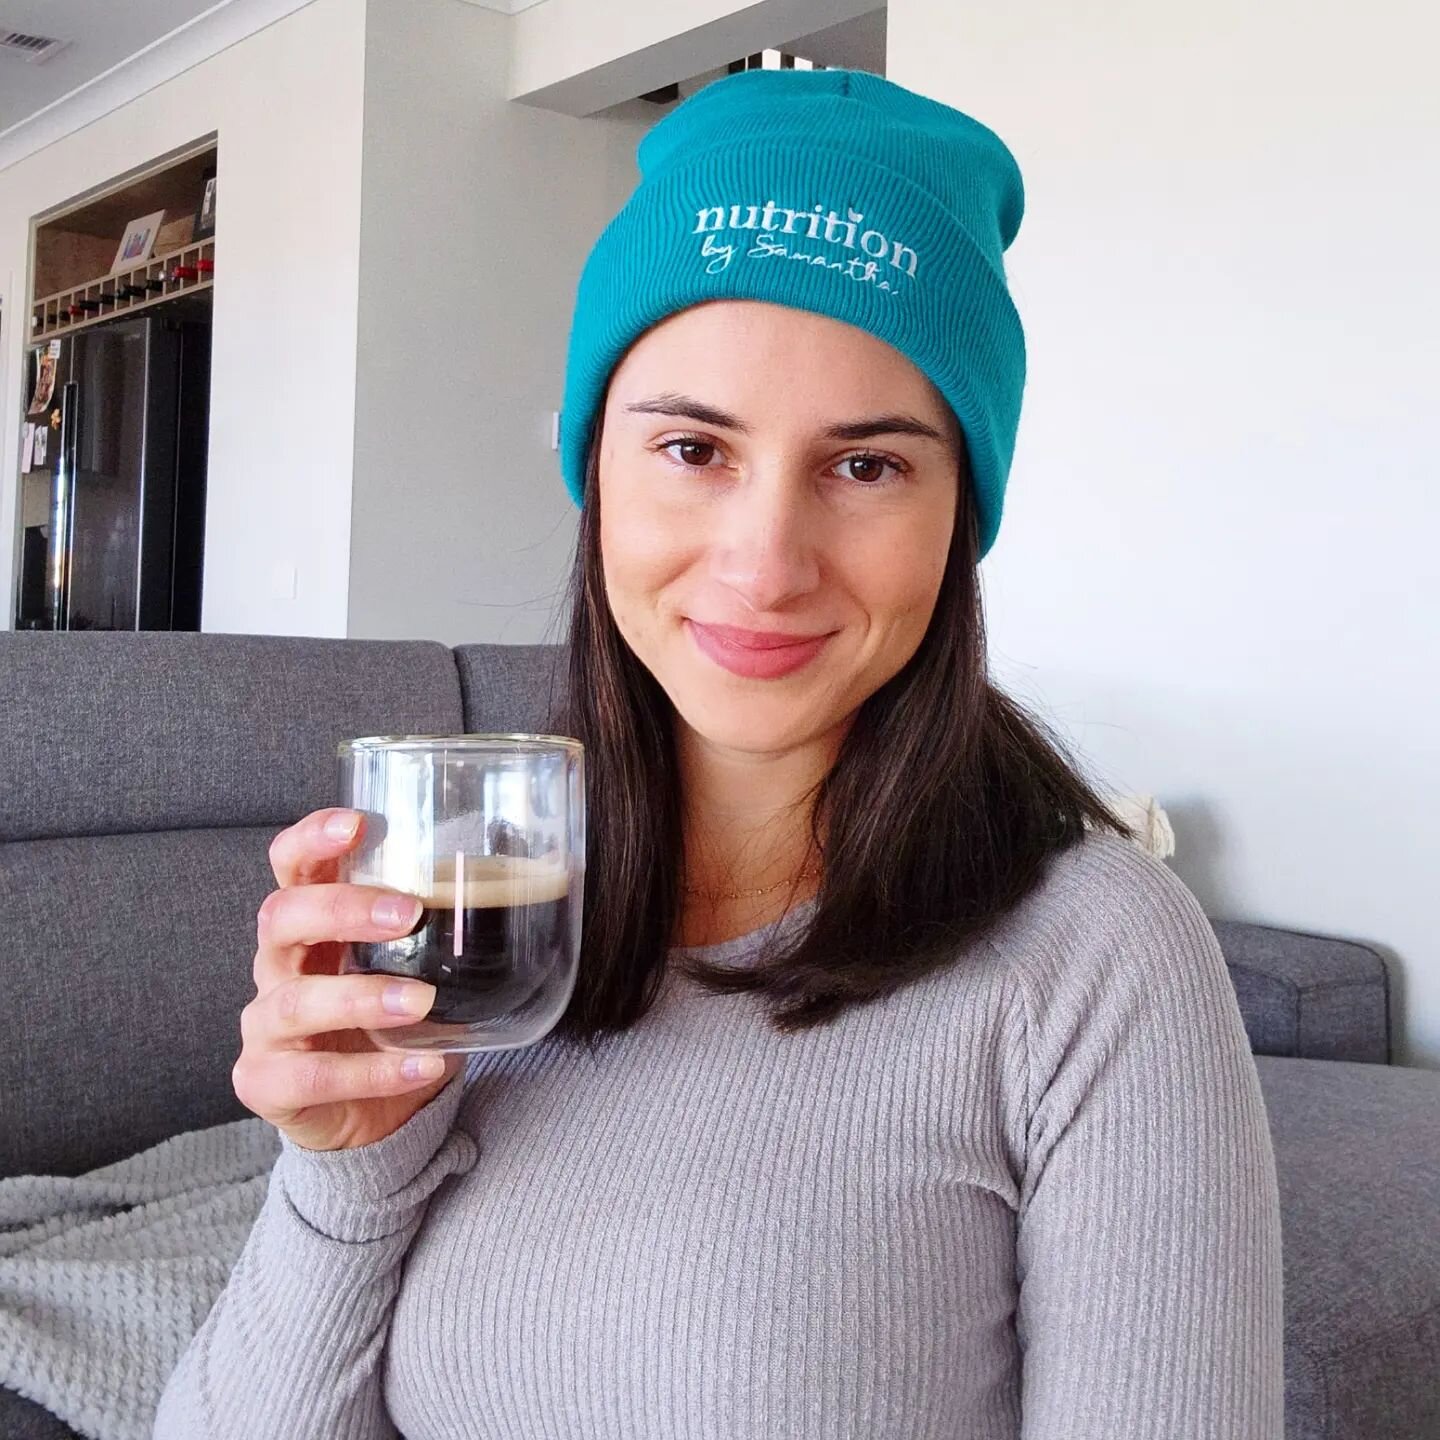 Nutrition by Samantha has Beanie's!! ❄️

These could not have come in at a better time with the icy cold weather here in Victoria! 

I've been wearing mine everyday whilst walking Ava or working on Nutrition Plans, they are just so warm and cosy! ⛄

